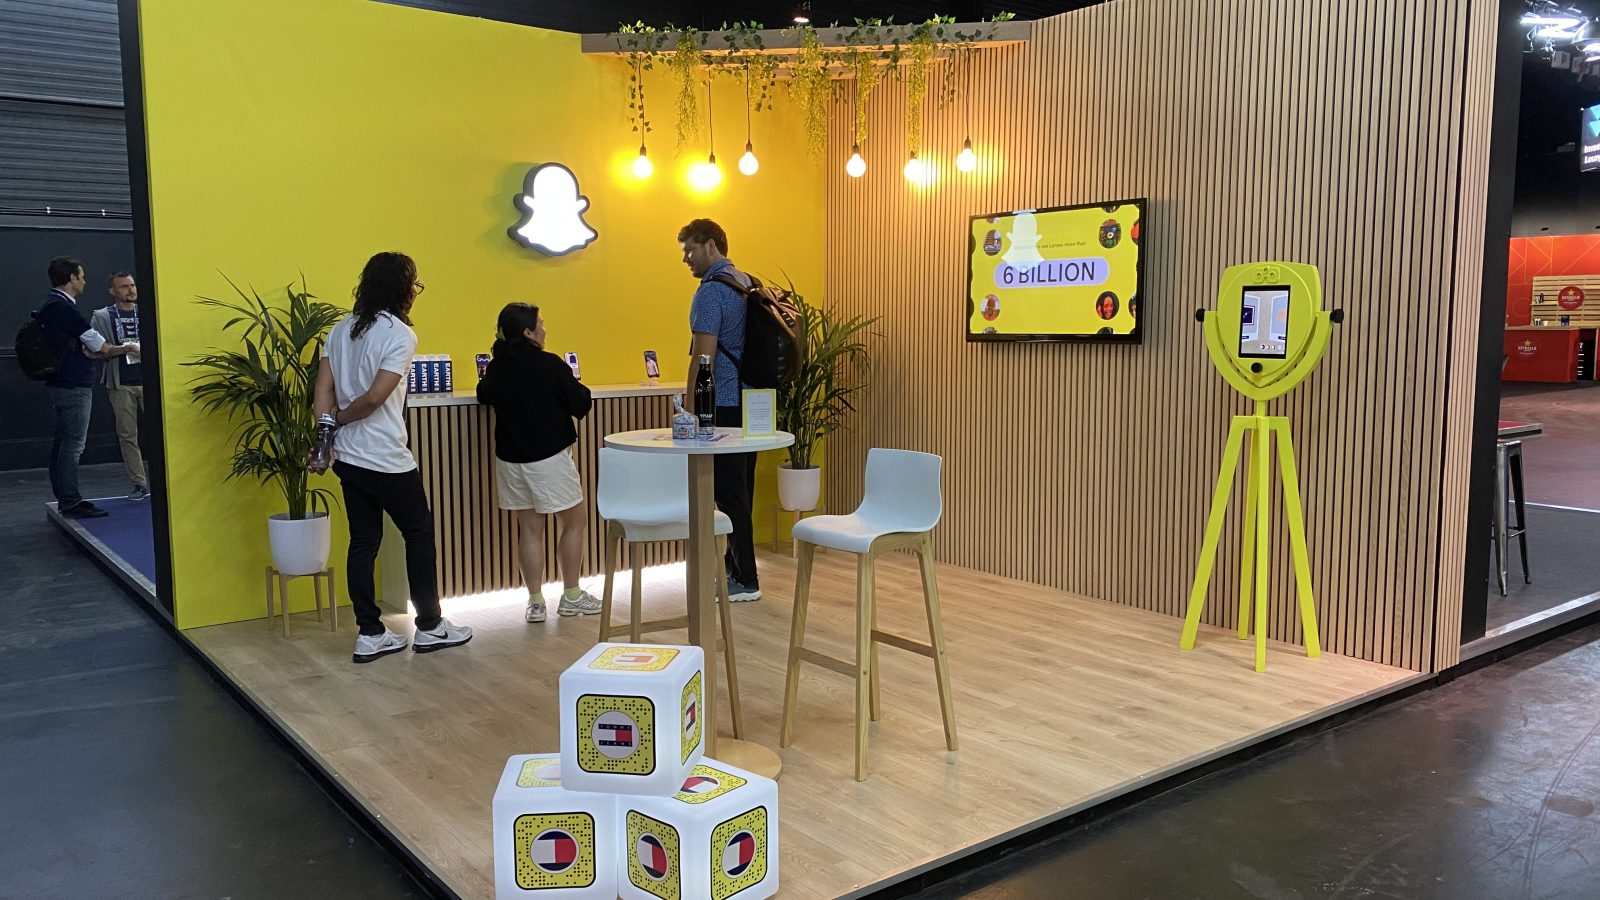 SNAP Inc: TNW Conference Amsterdam